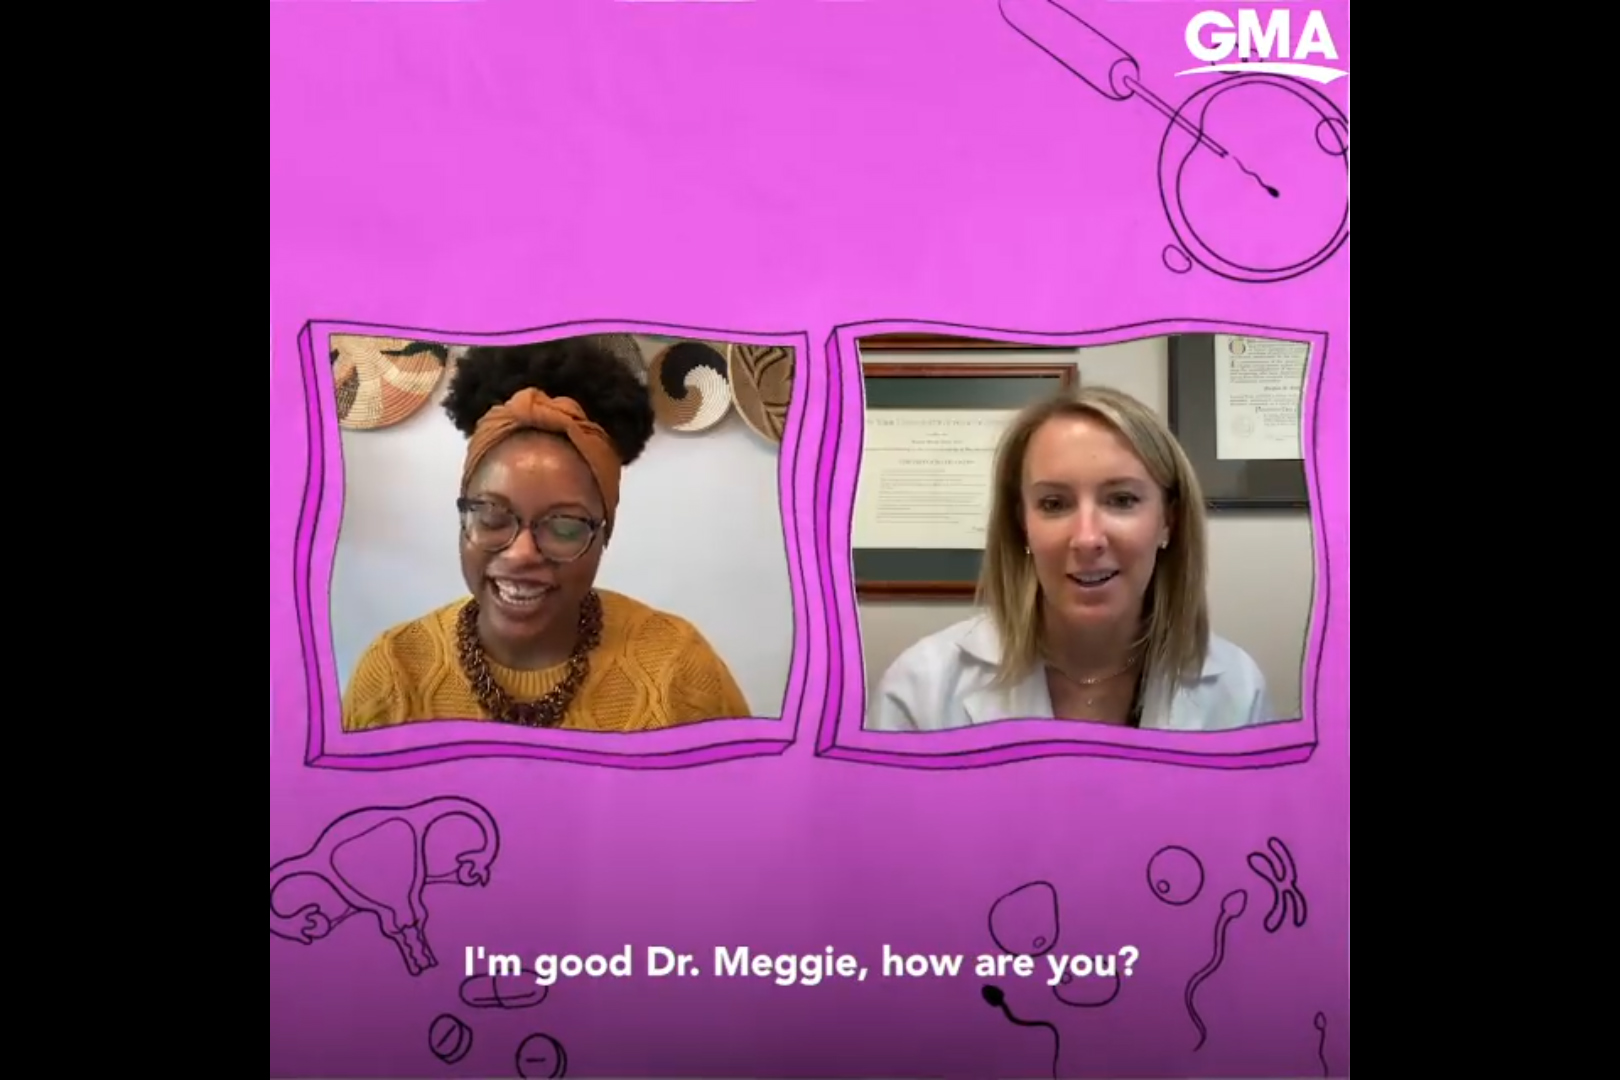 Hear what Dr. Meggie Smith said during an infertility interview with GMA